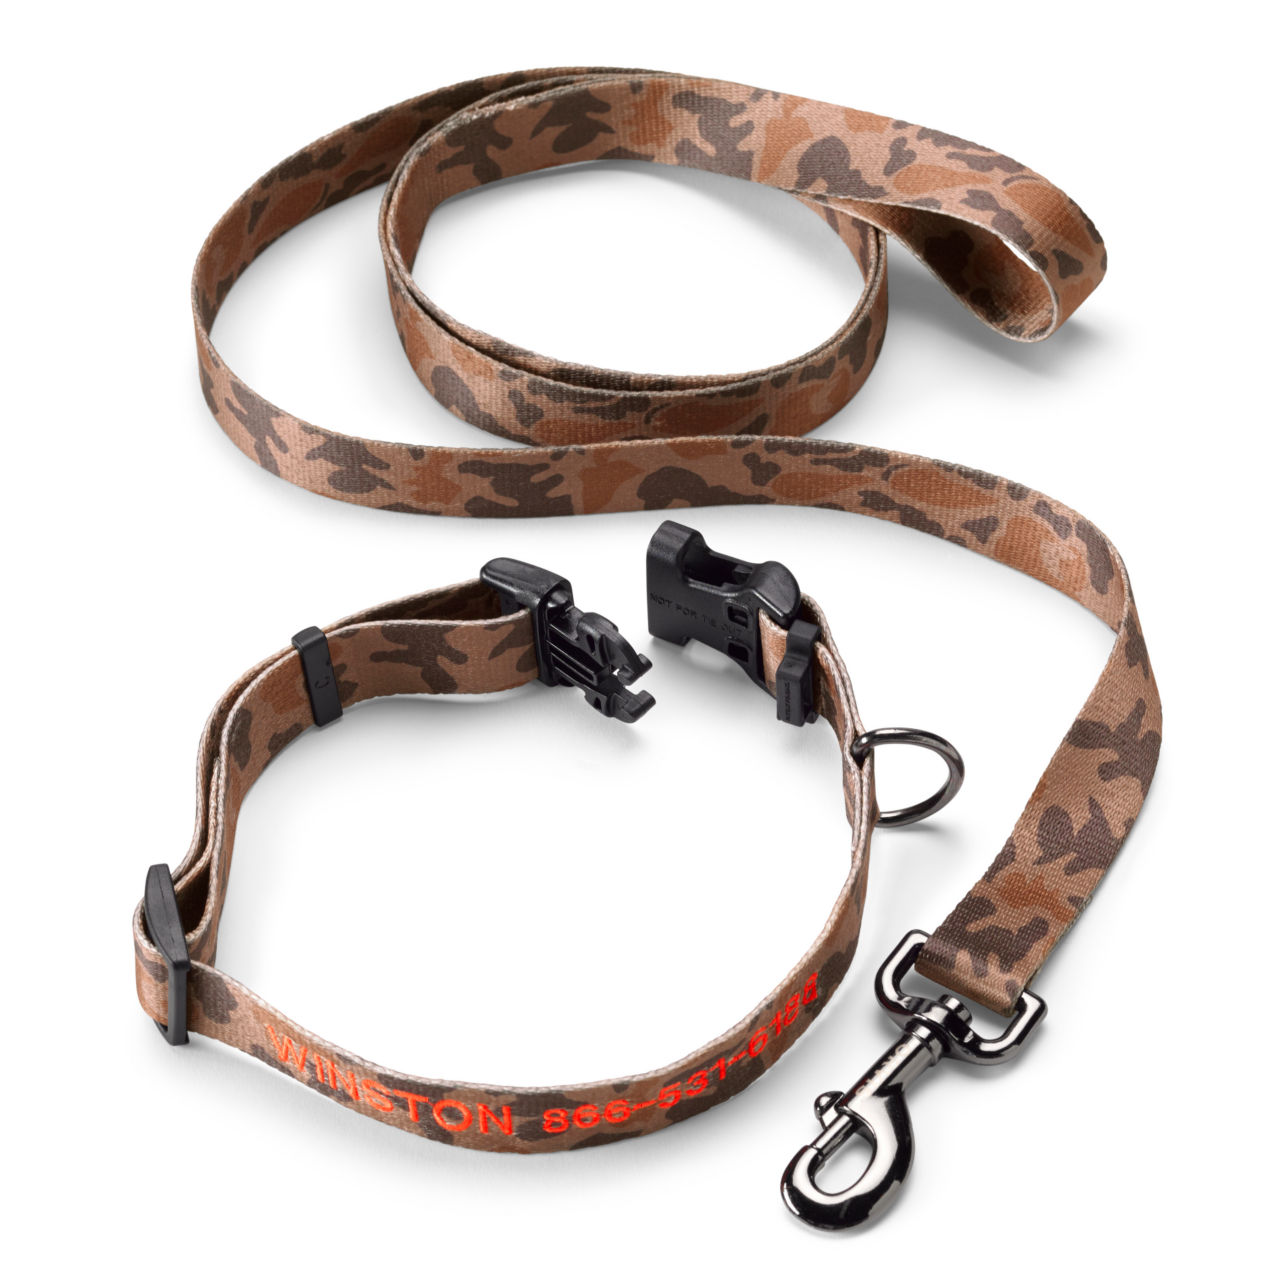 Personalized Adjustable Dog Collar with Leash - ORVIS 1971 CAMO image number 0